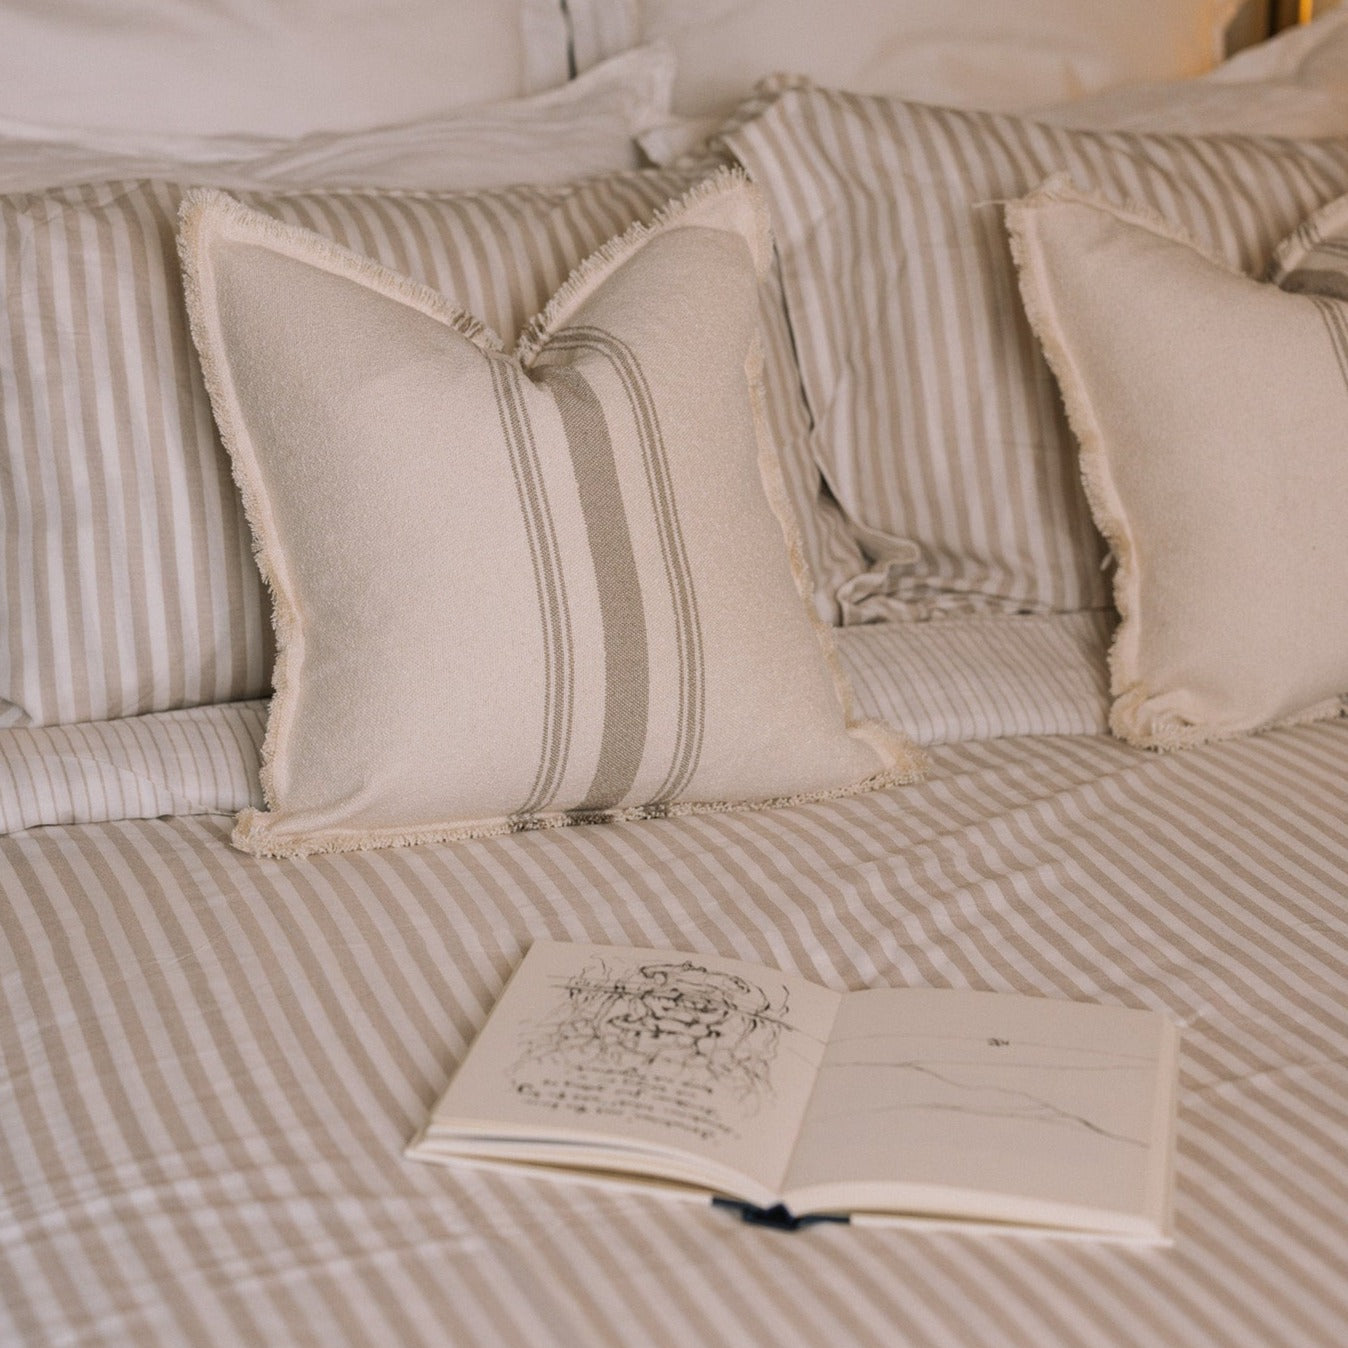 Striped neutral bedding on a brass bed with an open book.